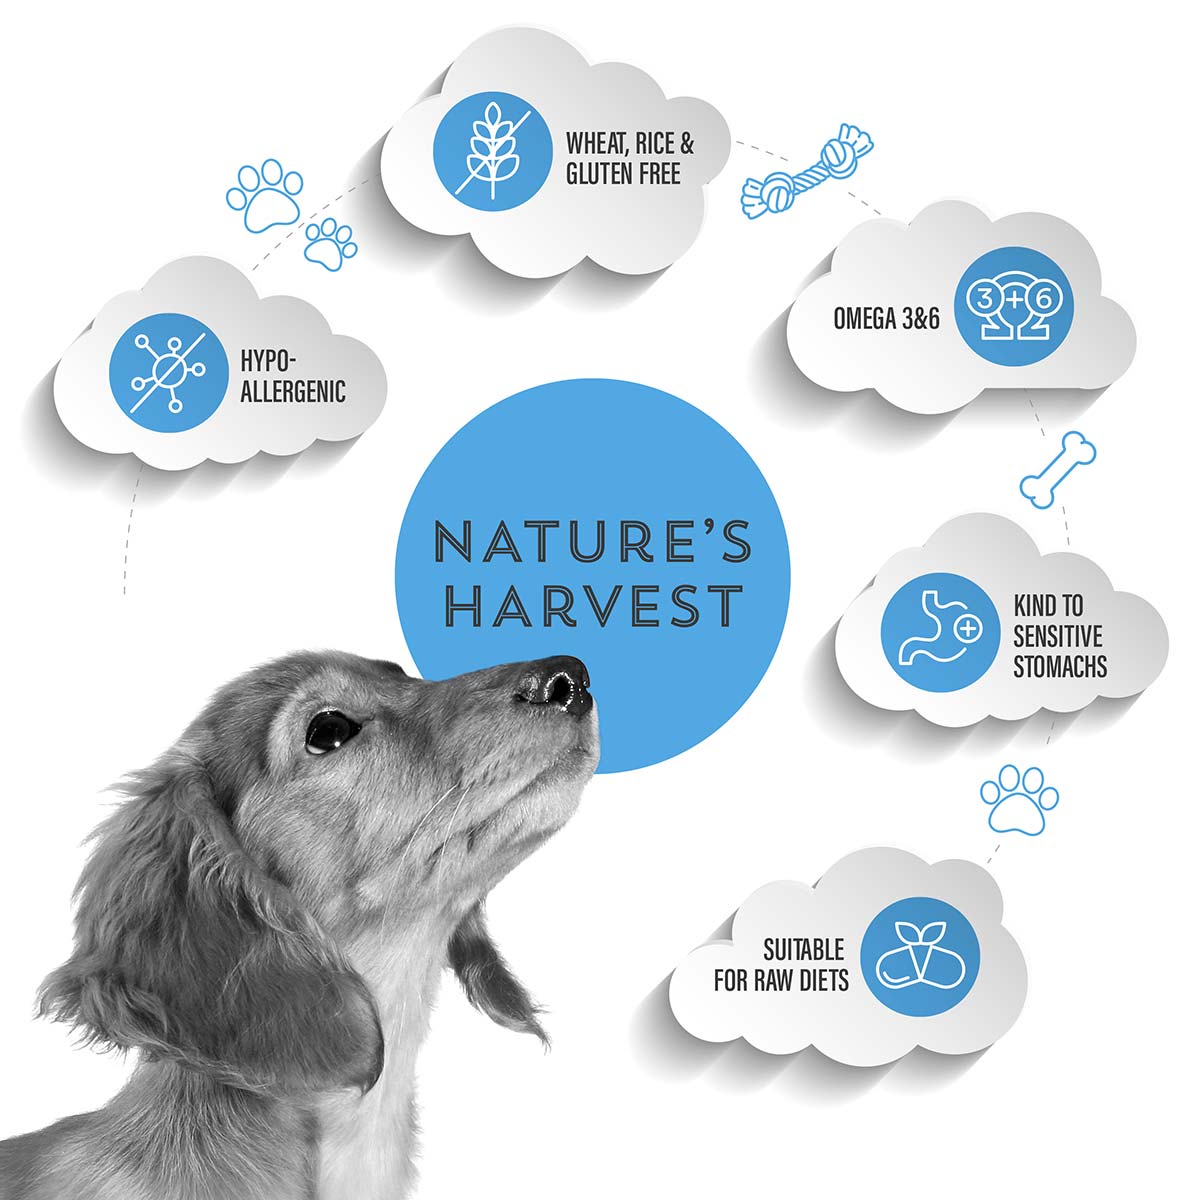 Ocean Fish and Sweet Potato Pie Hypoallergenic Cold Pressed dog food key selling points - Raw Made Easy Natures HarvestOcean Fish and Sweet Potato Pie Hypoallergenic Cold Pressed dog food key selling points - Raw Made Easy Natures Harvest